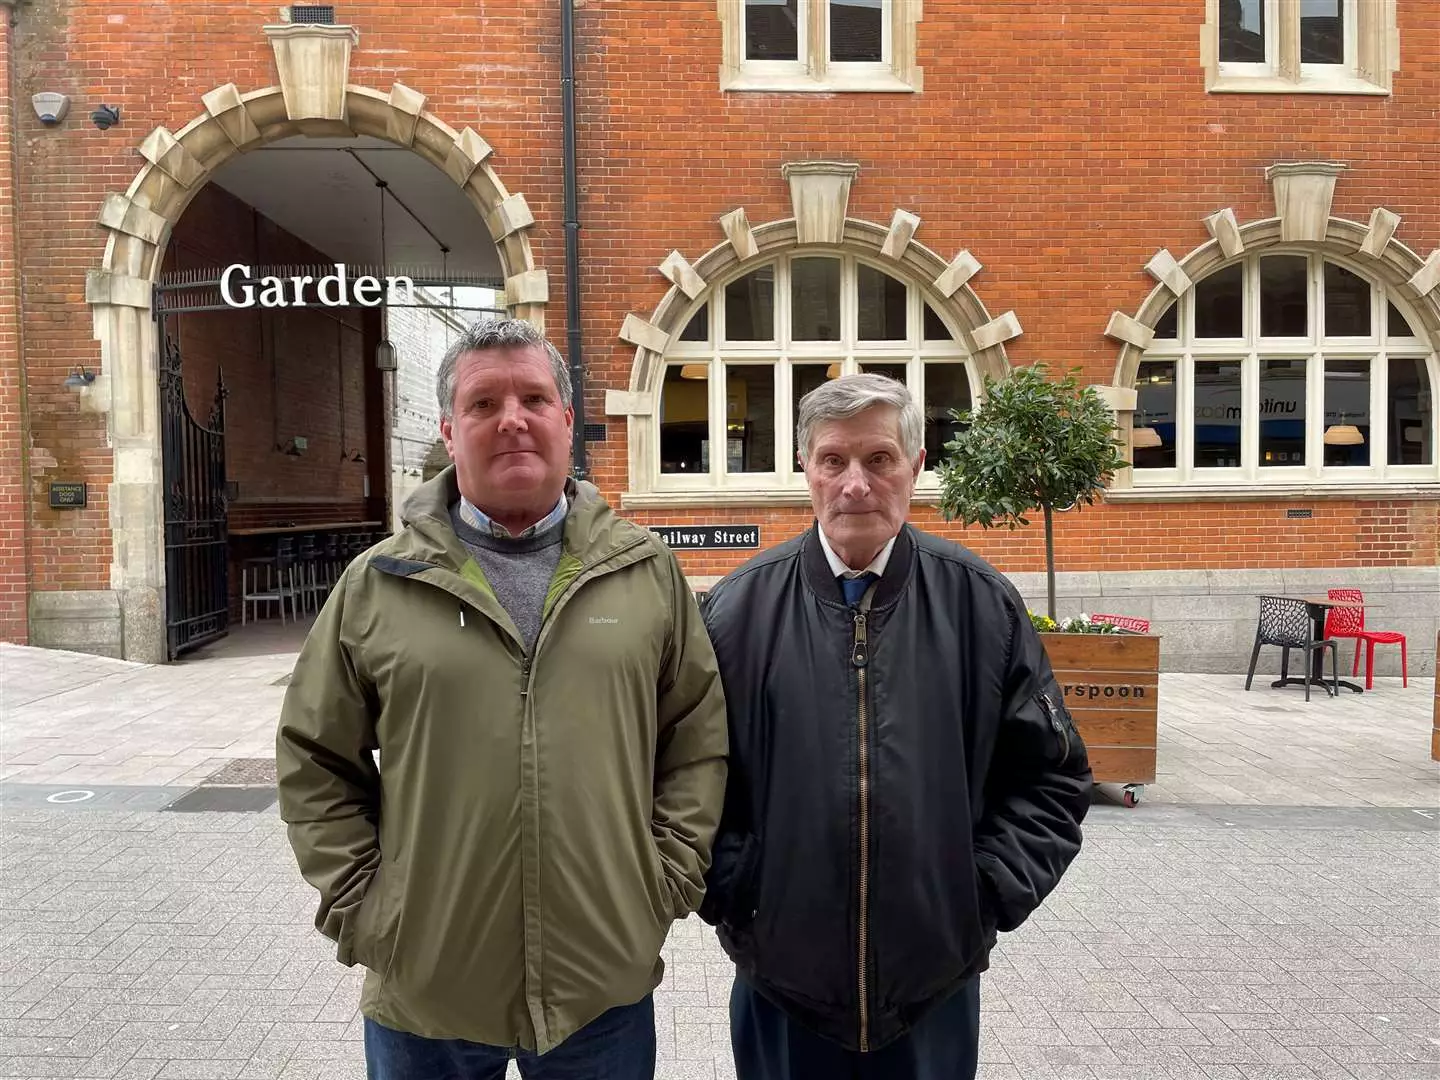 Mark and Keith were kicked out of the Wetherspoons in Kent.